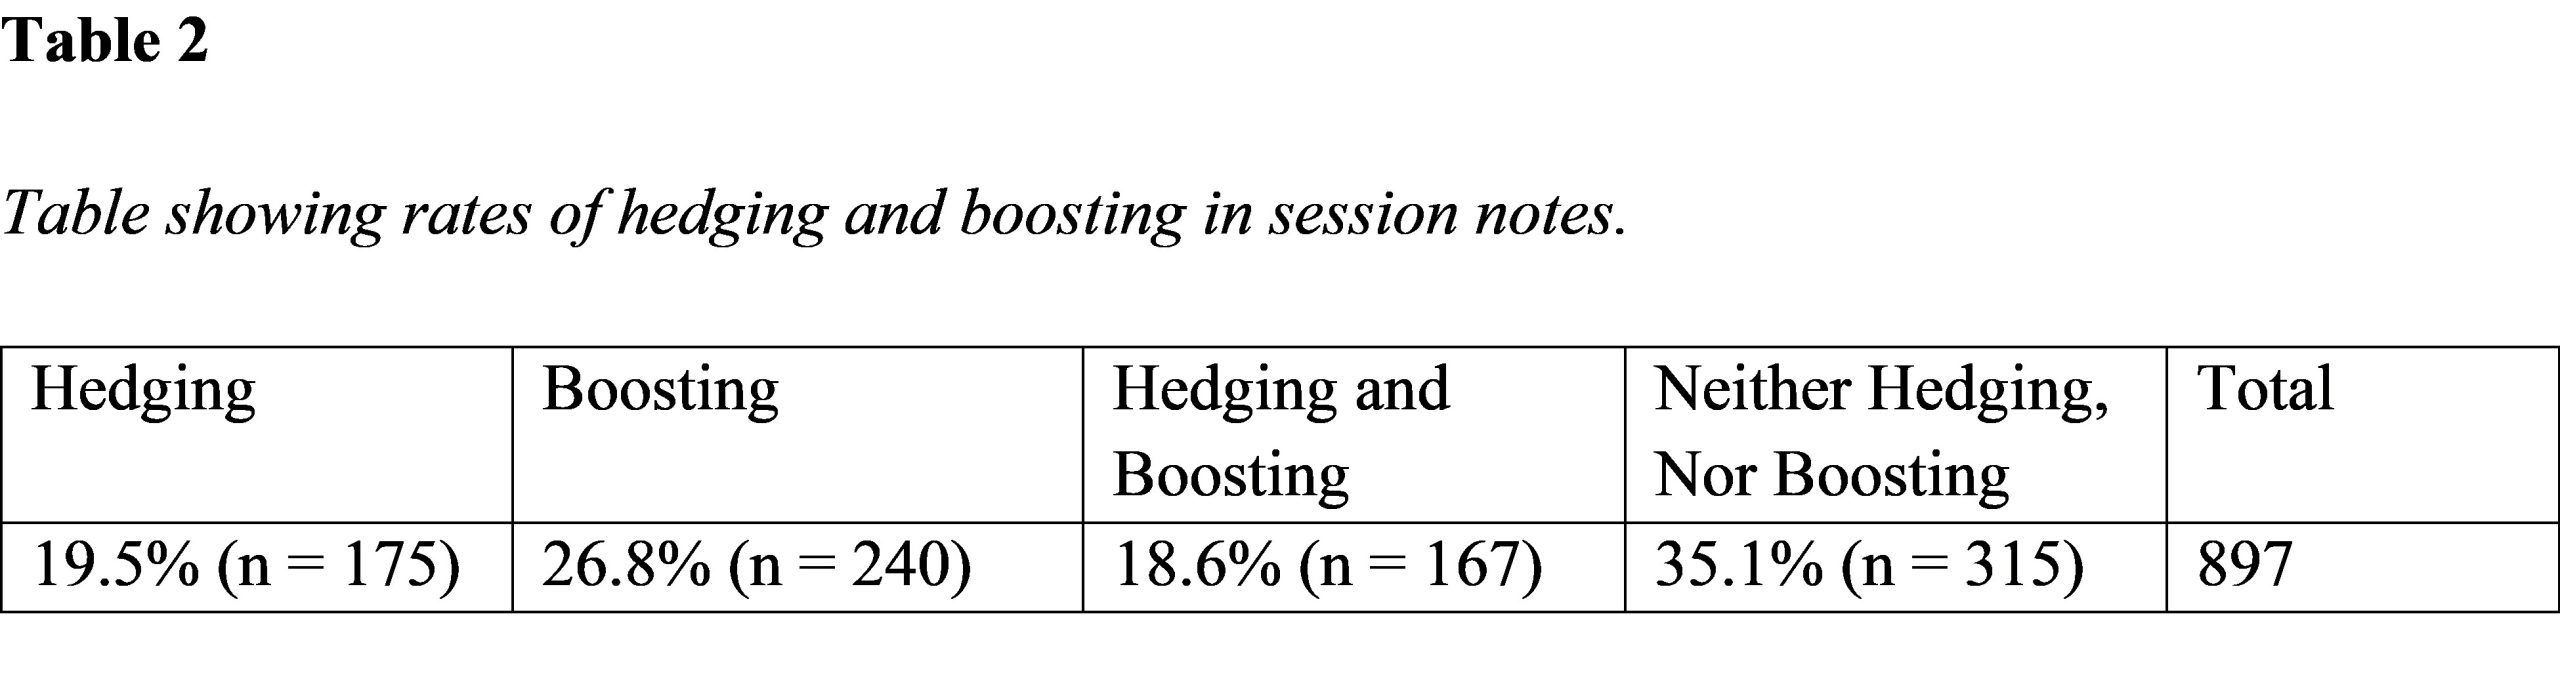 Table showing rates of hedging and boosting in session notes. The majority are neither hedging or boosting (35%), 27% are boosting and 19% use hedging and boosting.